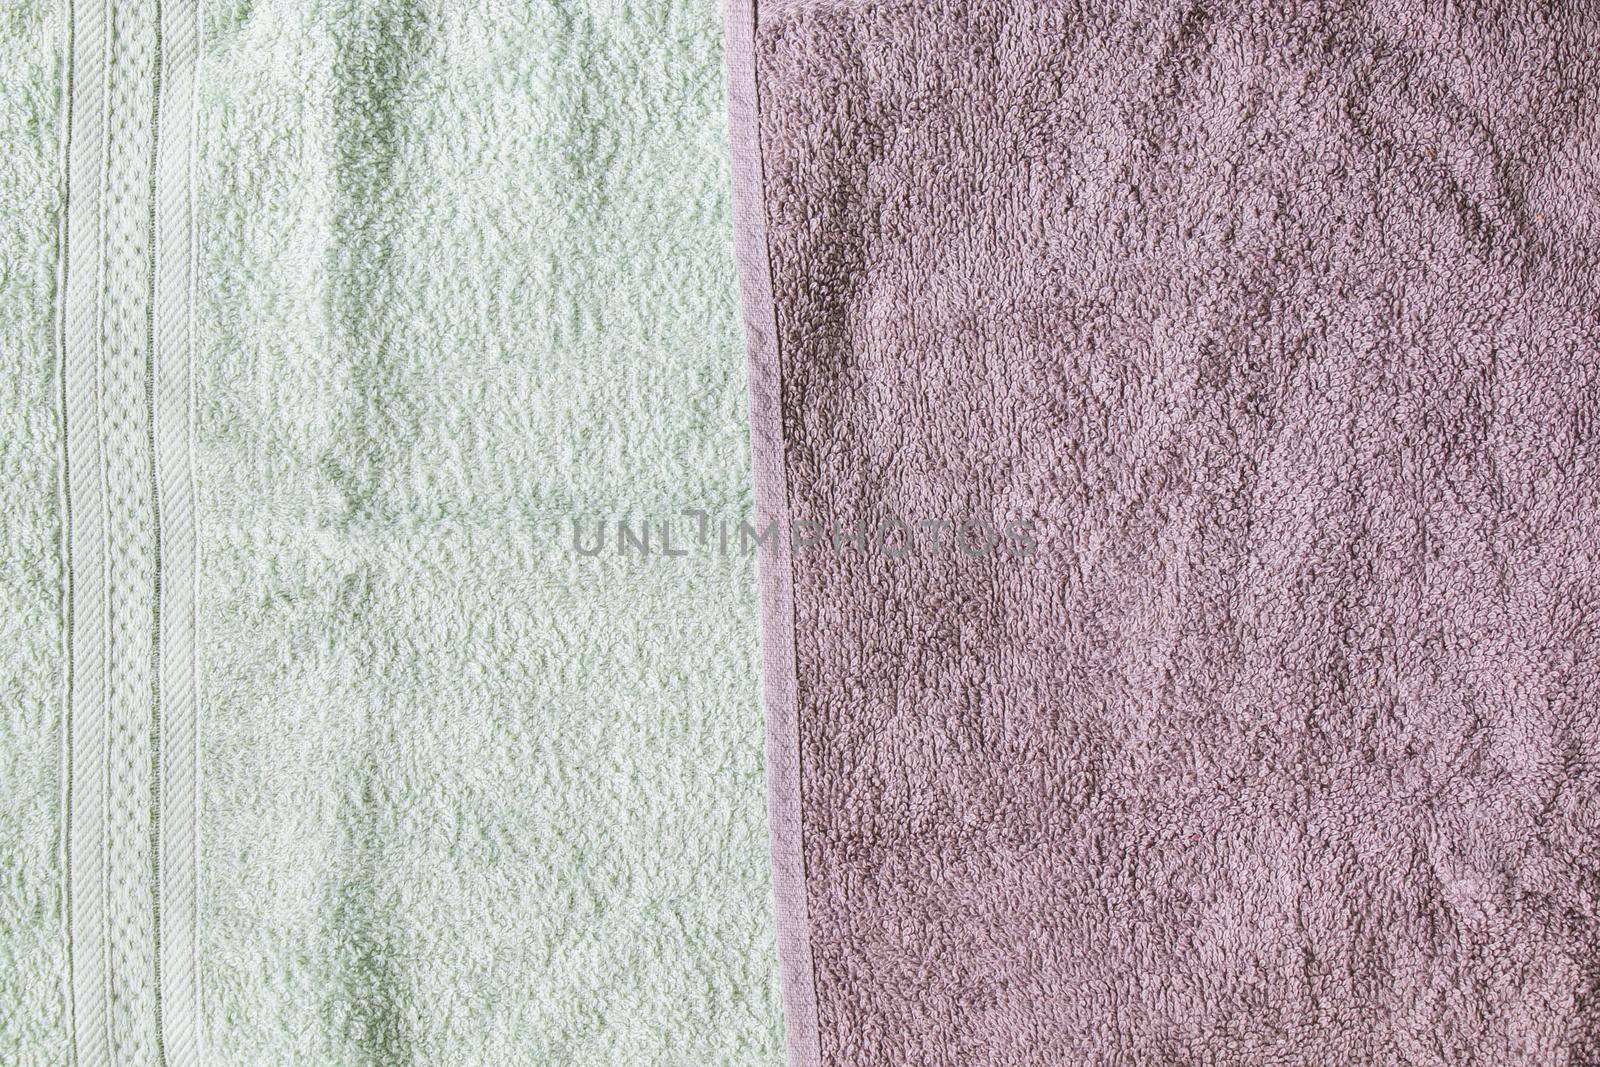 Towel texture and pattern background by Taidundua